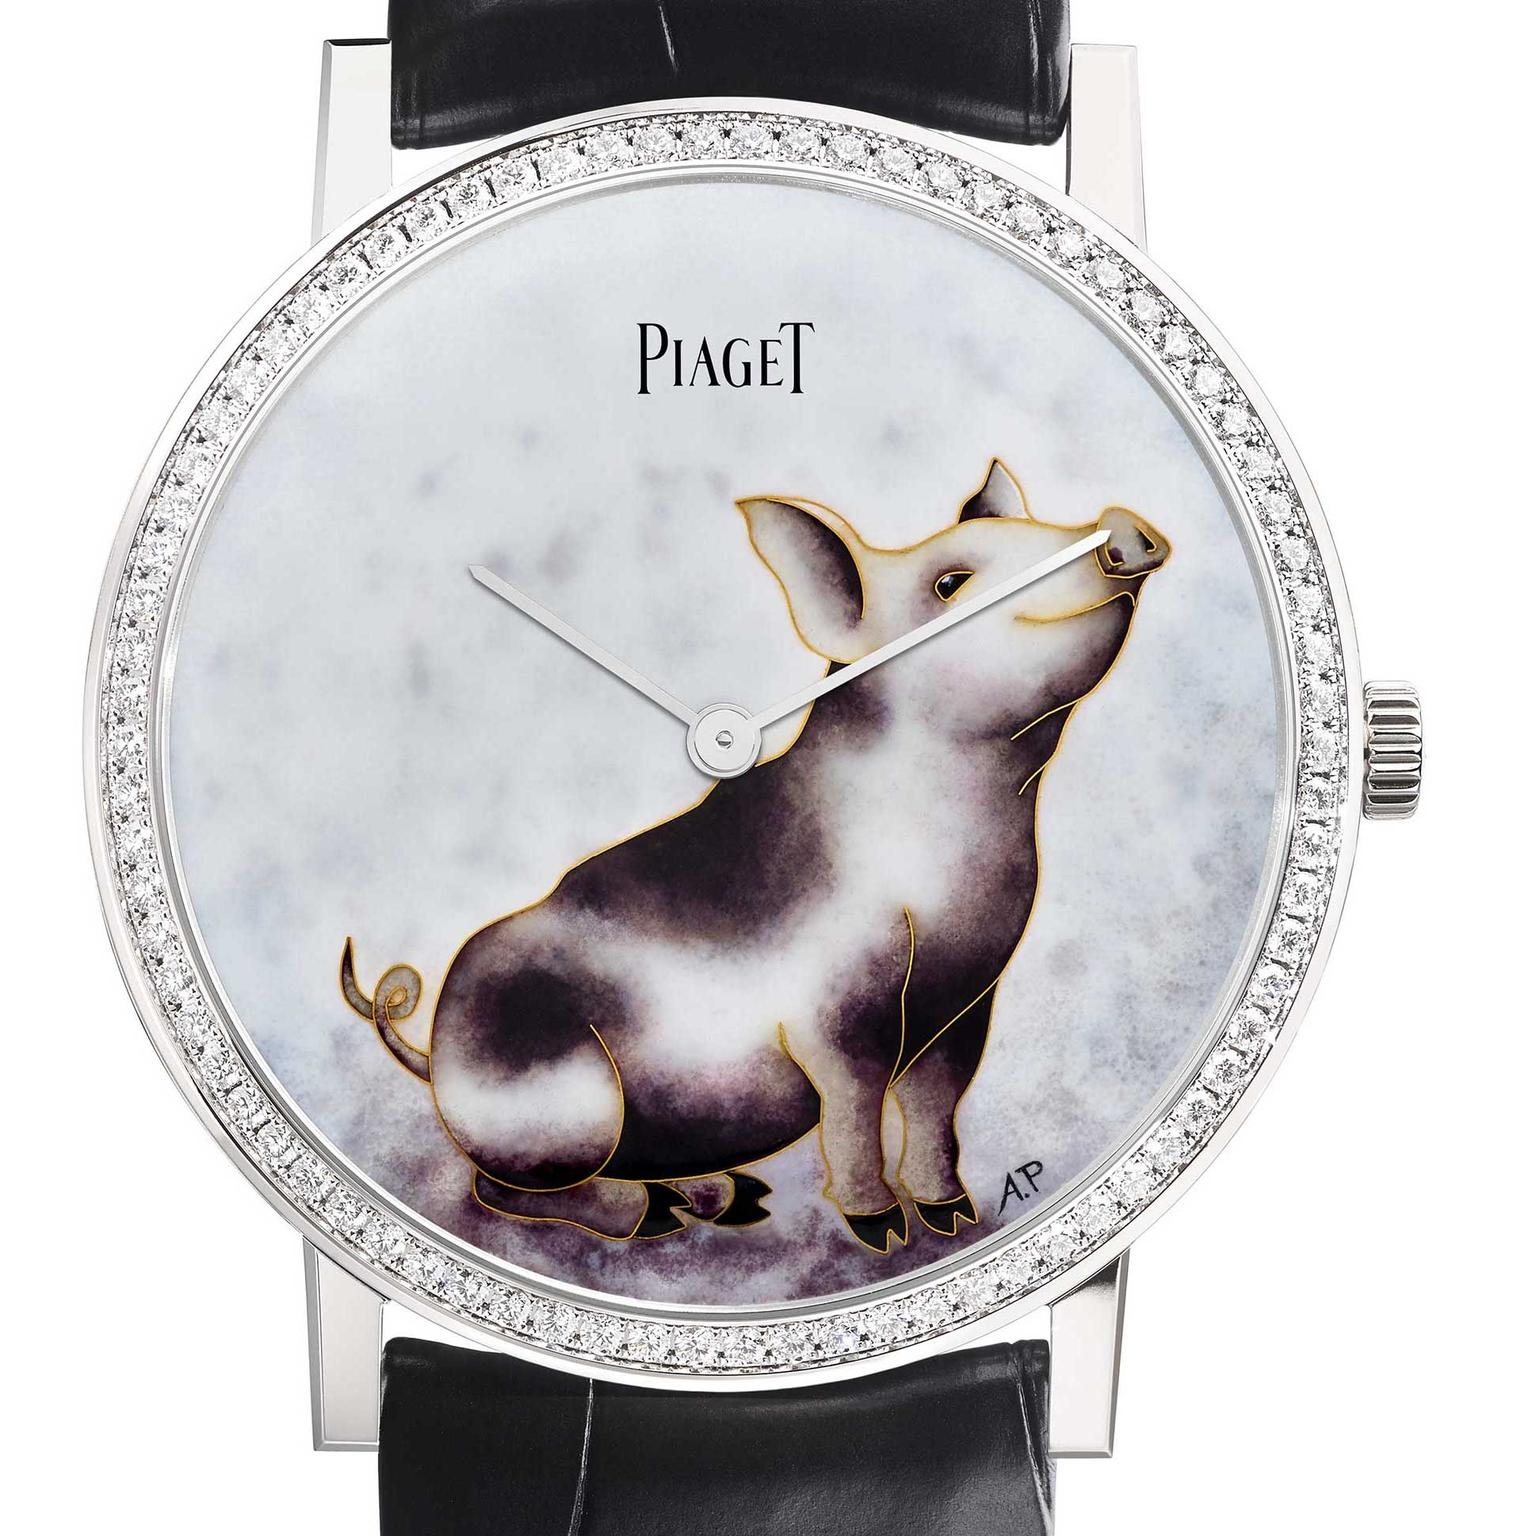  Piaget Altiplano Chinese New Year Pig watch close up